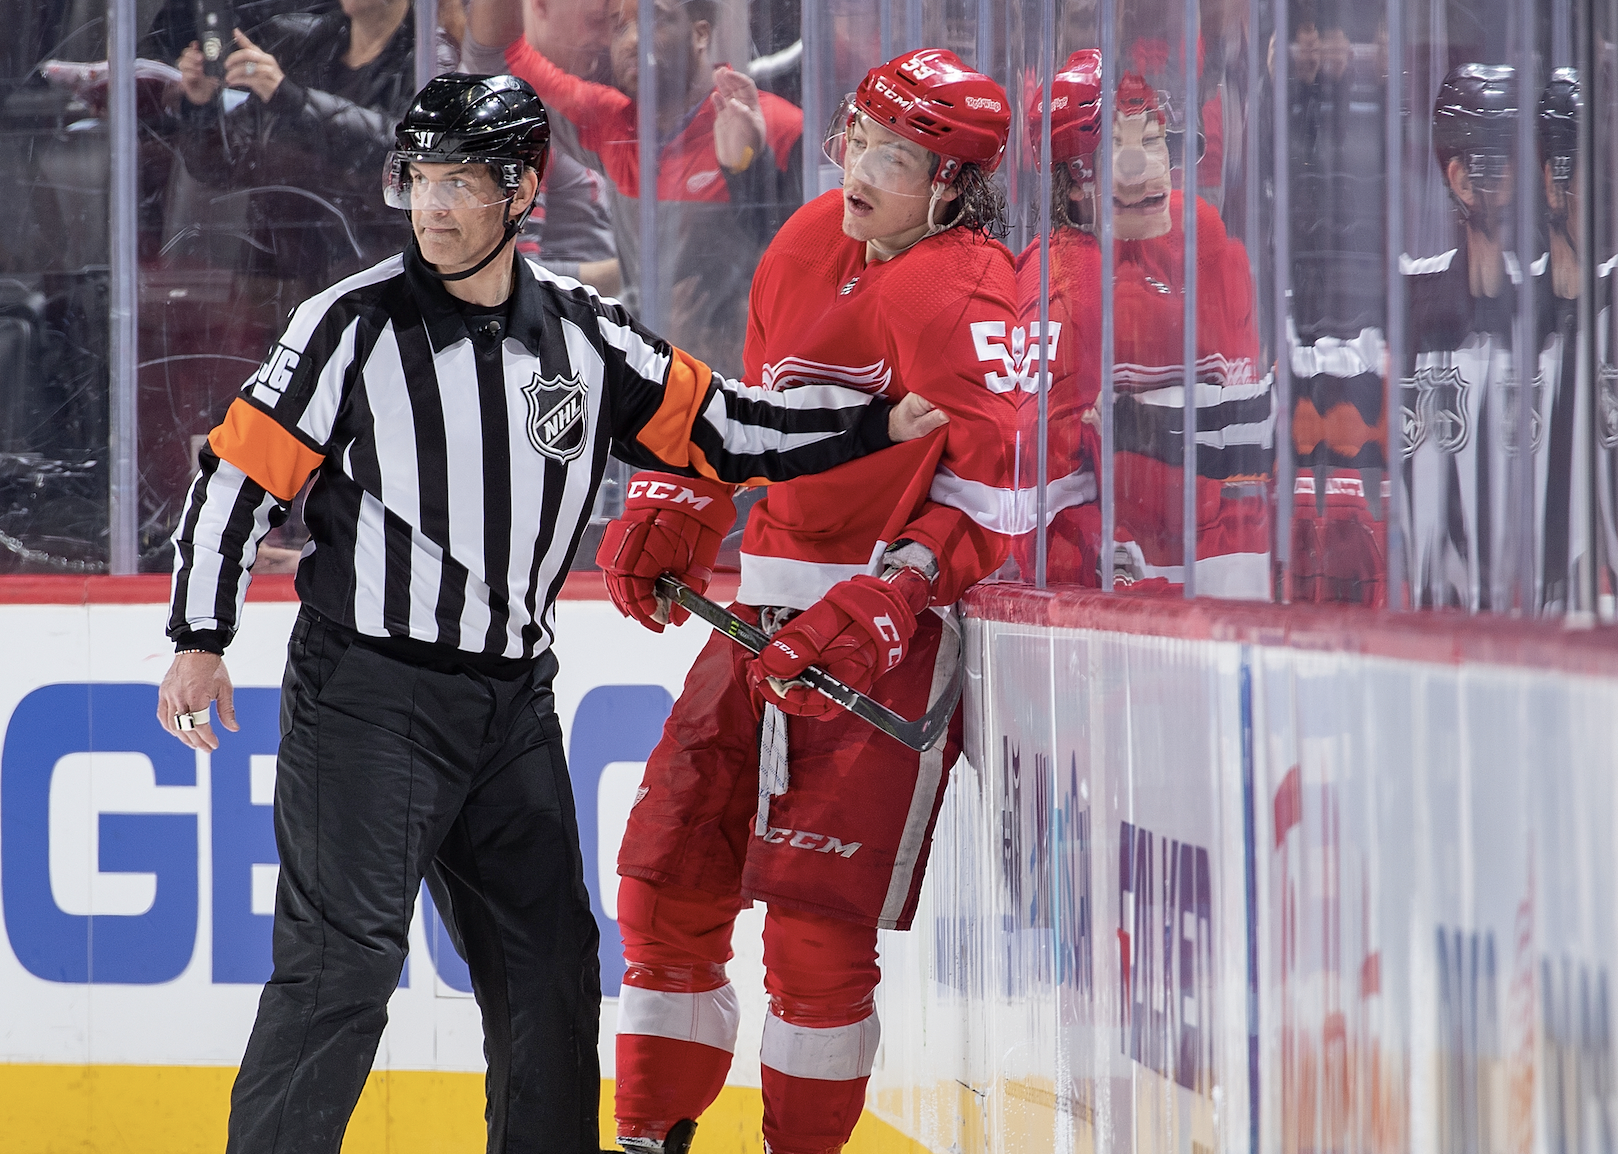 Referee holds back Tyler Bertuzzi of the Detroit Red Wings.